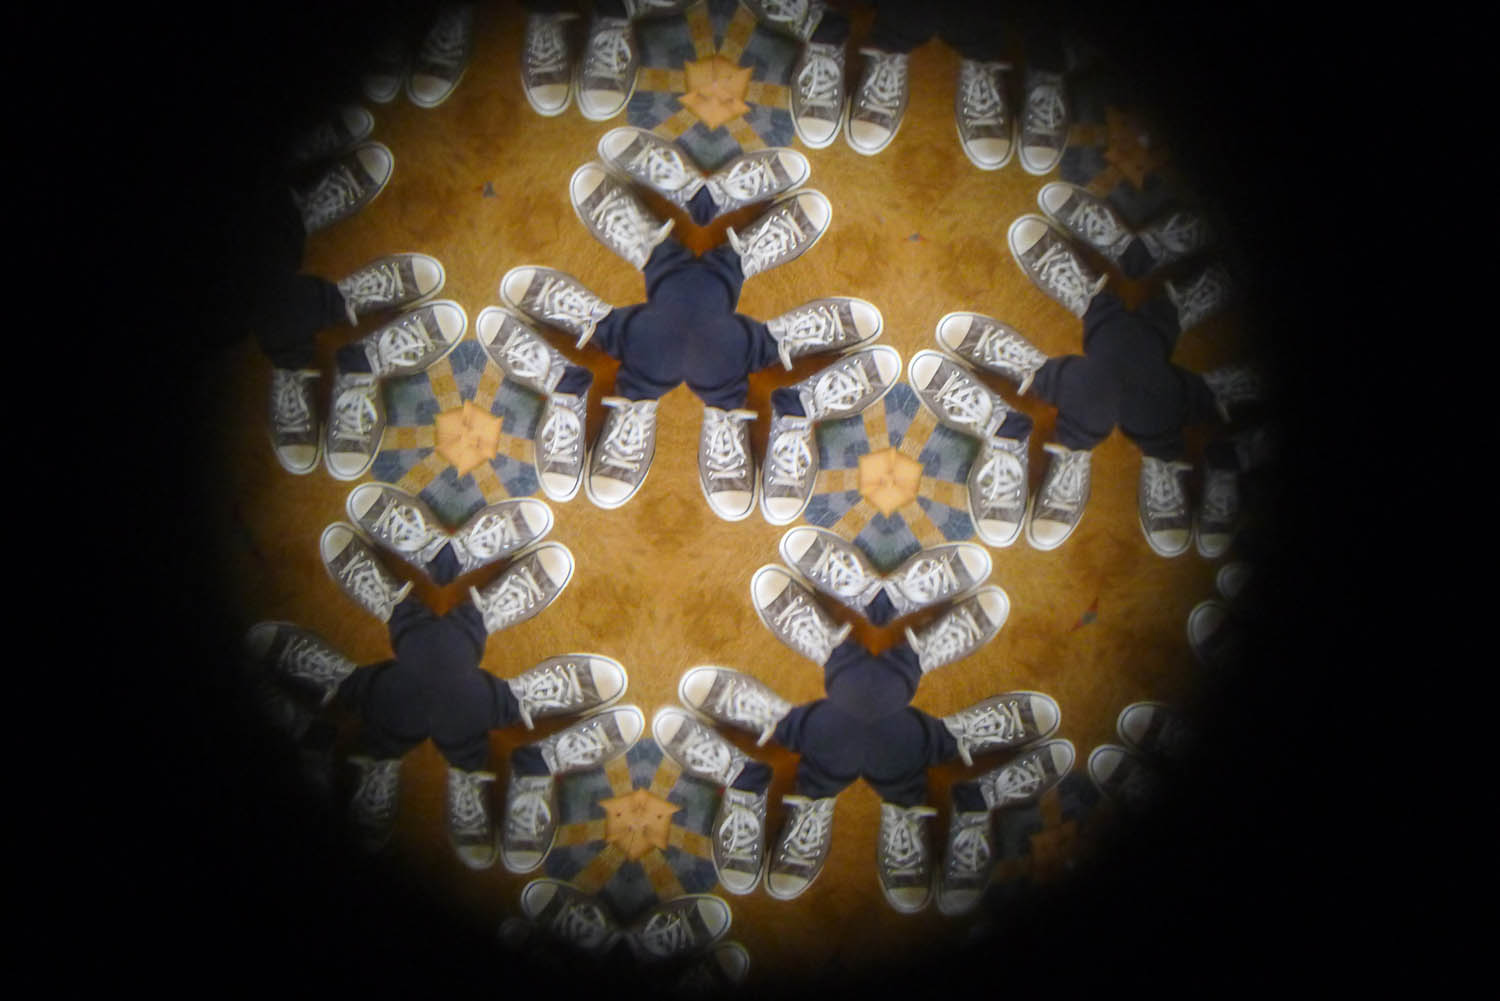 Looking through a kaleidoscope with a glass end